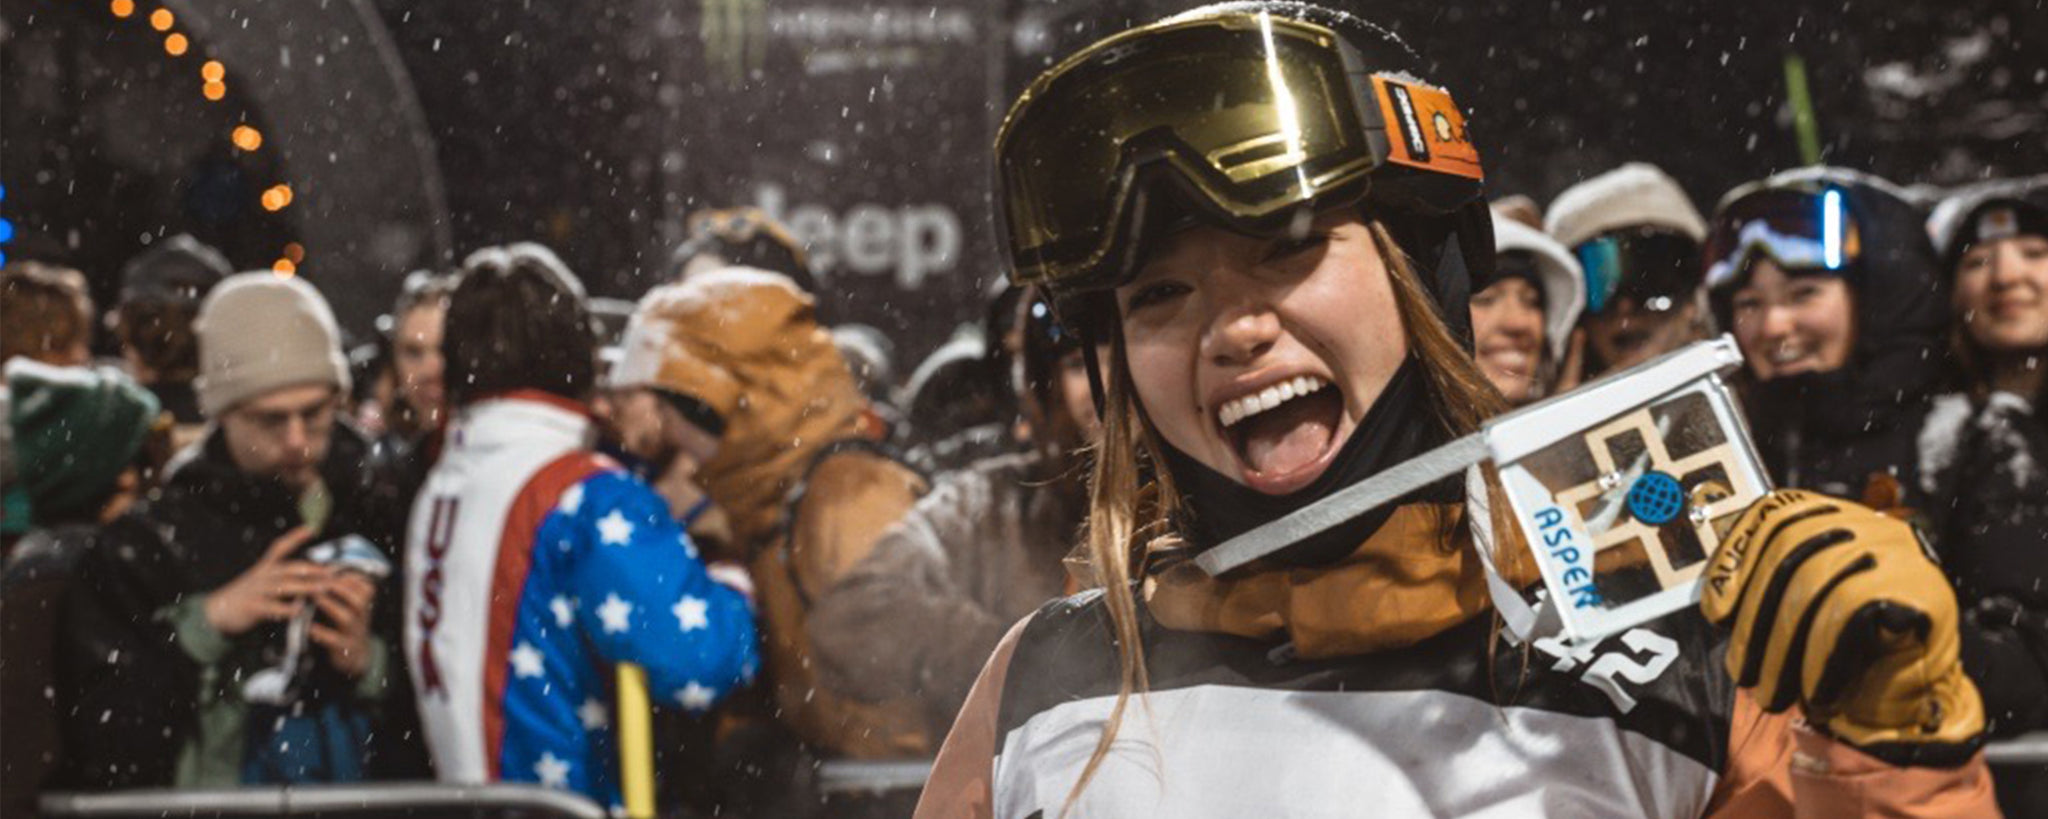 Zoe Atkin celebrates her first place finish at the X Games